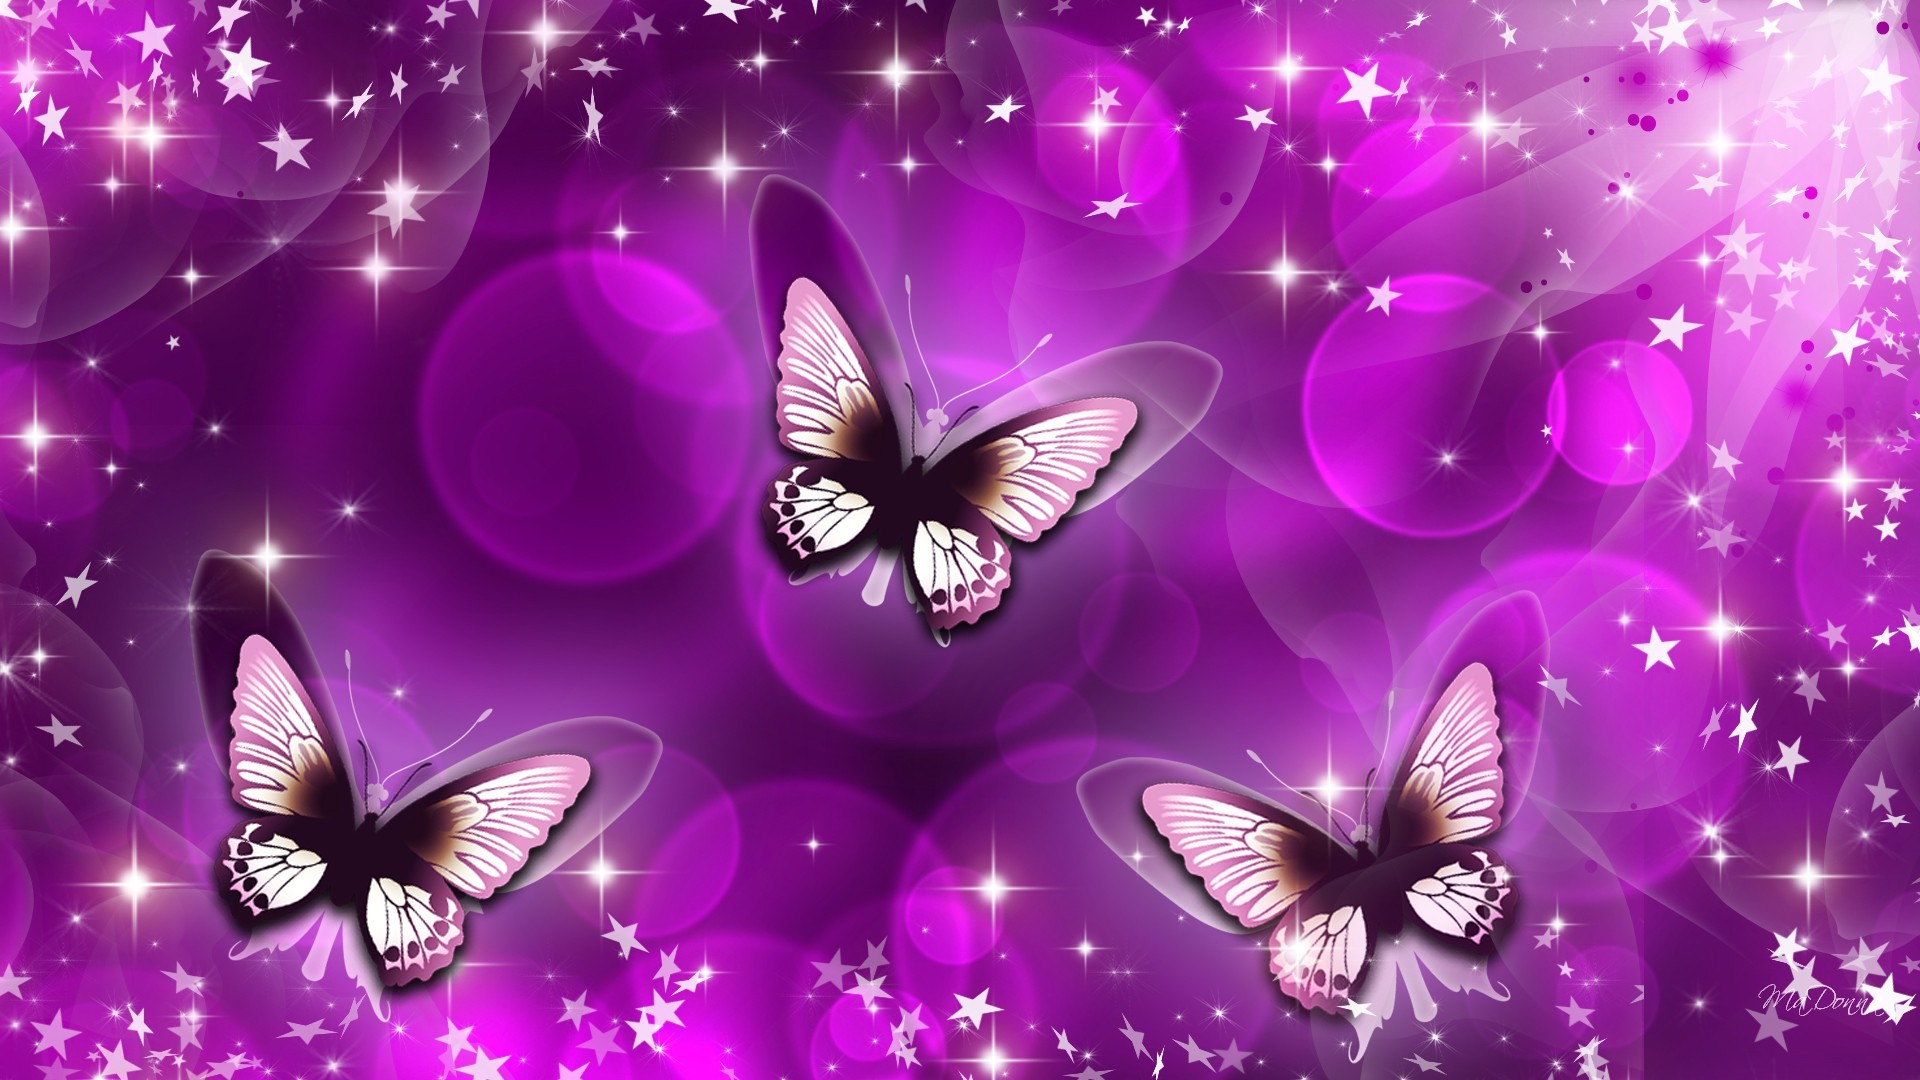 Purple Butterfly Wallpaper Wallpapers Browse 103 Best Backgrounds Images On Pinterest Purple Backgrounds 1920x1080